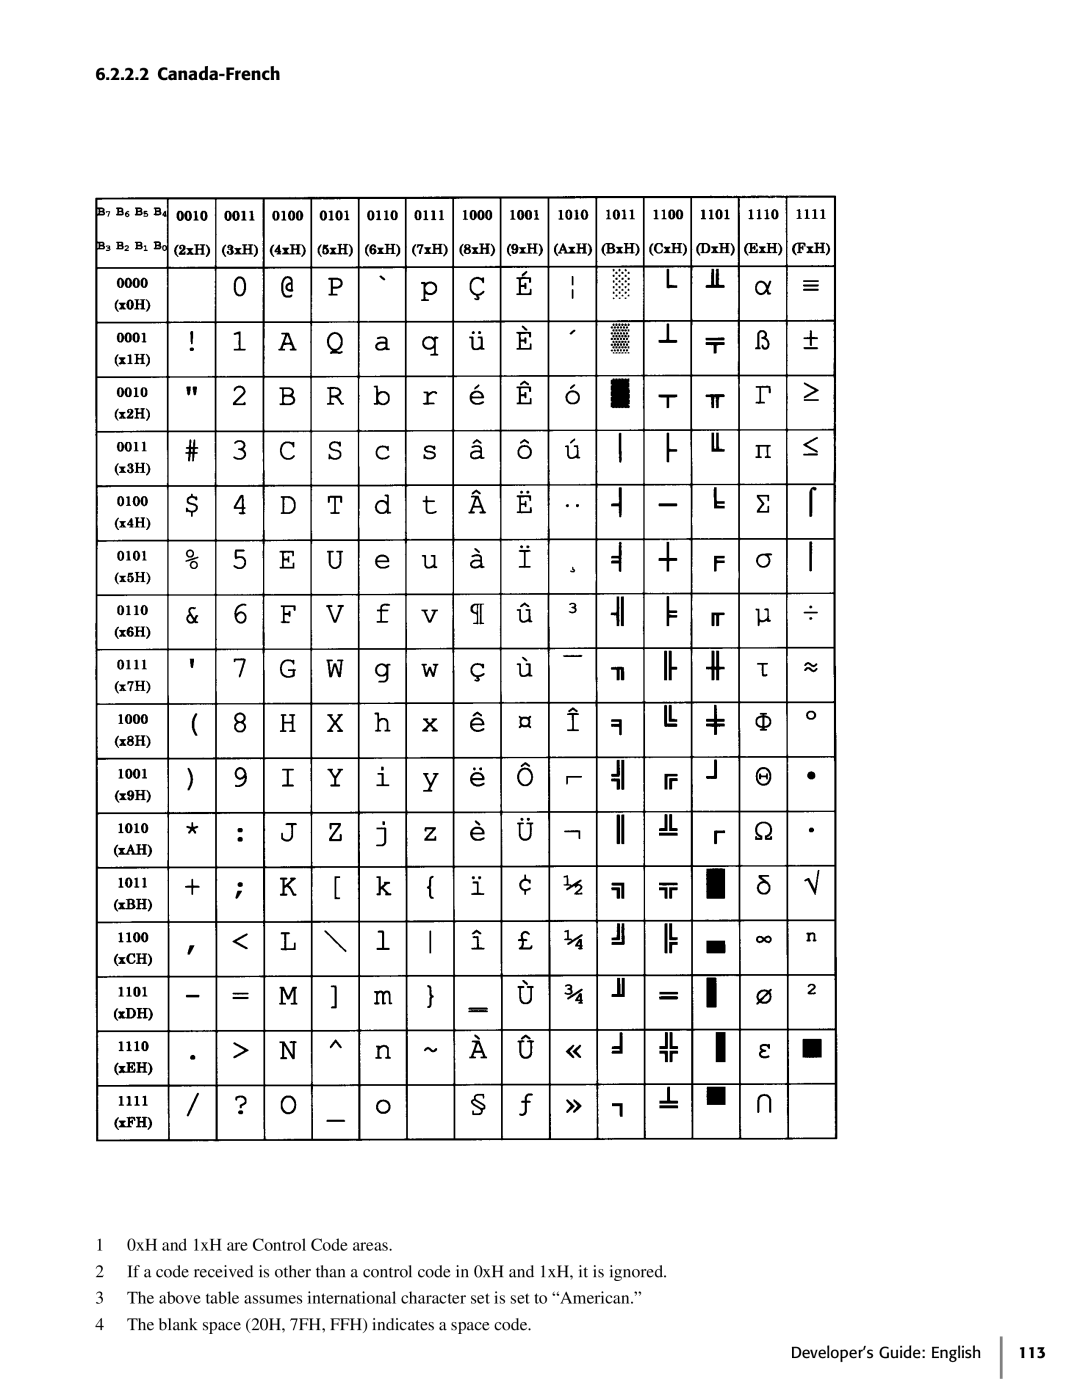 Oki 425D manual Canada-French, 1 0xH and 1xH are Control Code areas, The blank space 20H, 7FH, FFH indicates a space code 